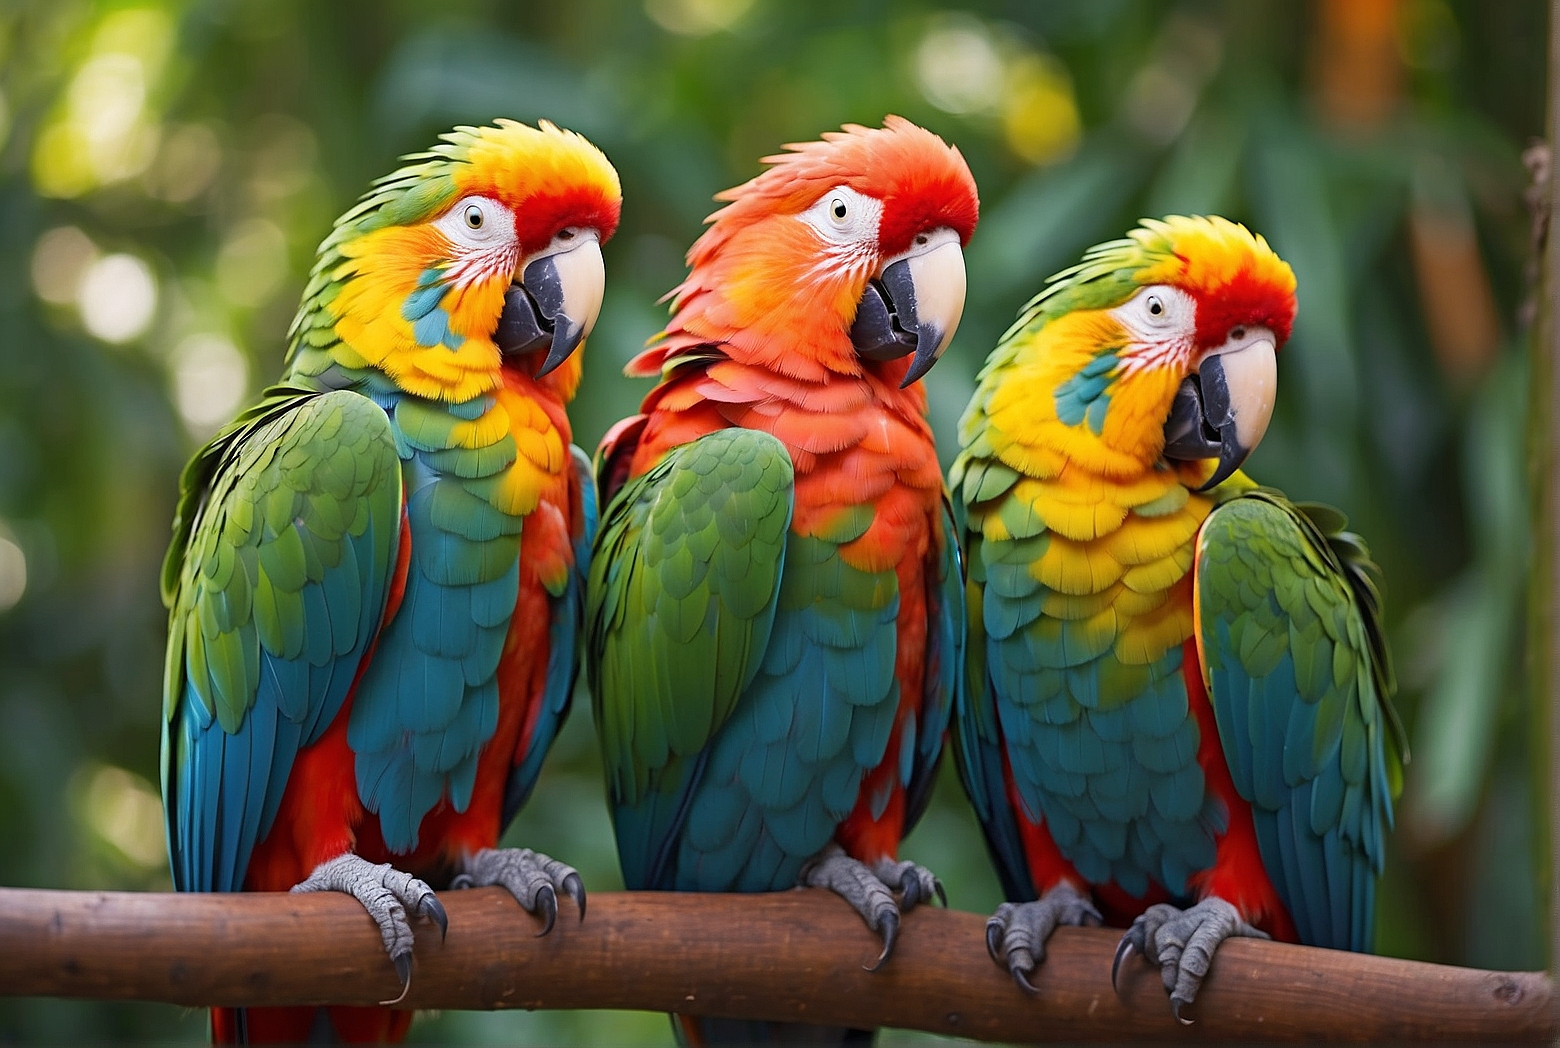 The Ultimate Guide on How to Care for Your Parrot